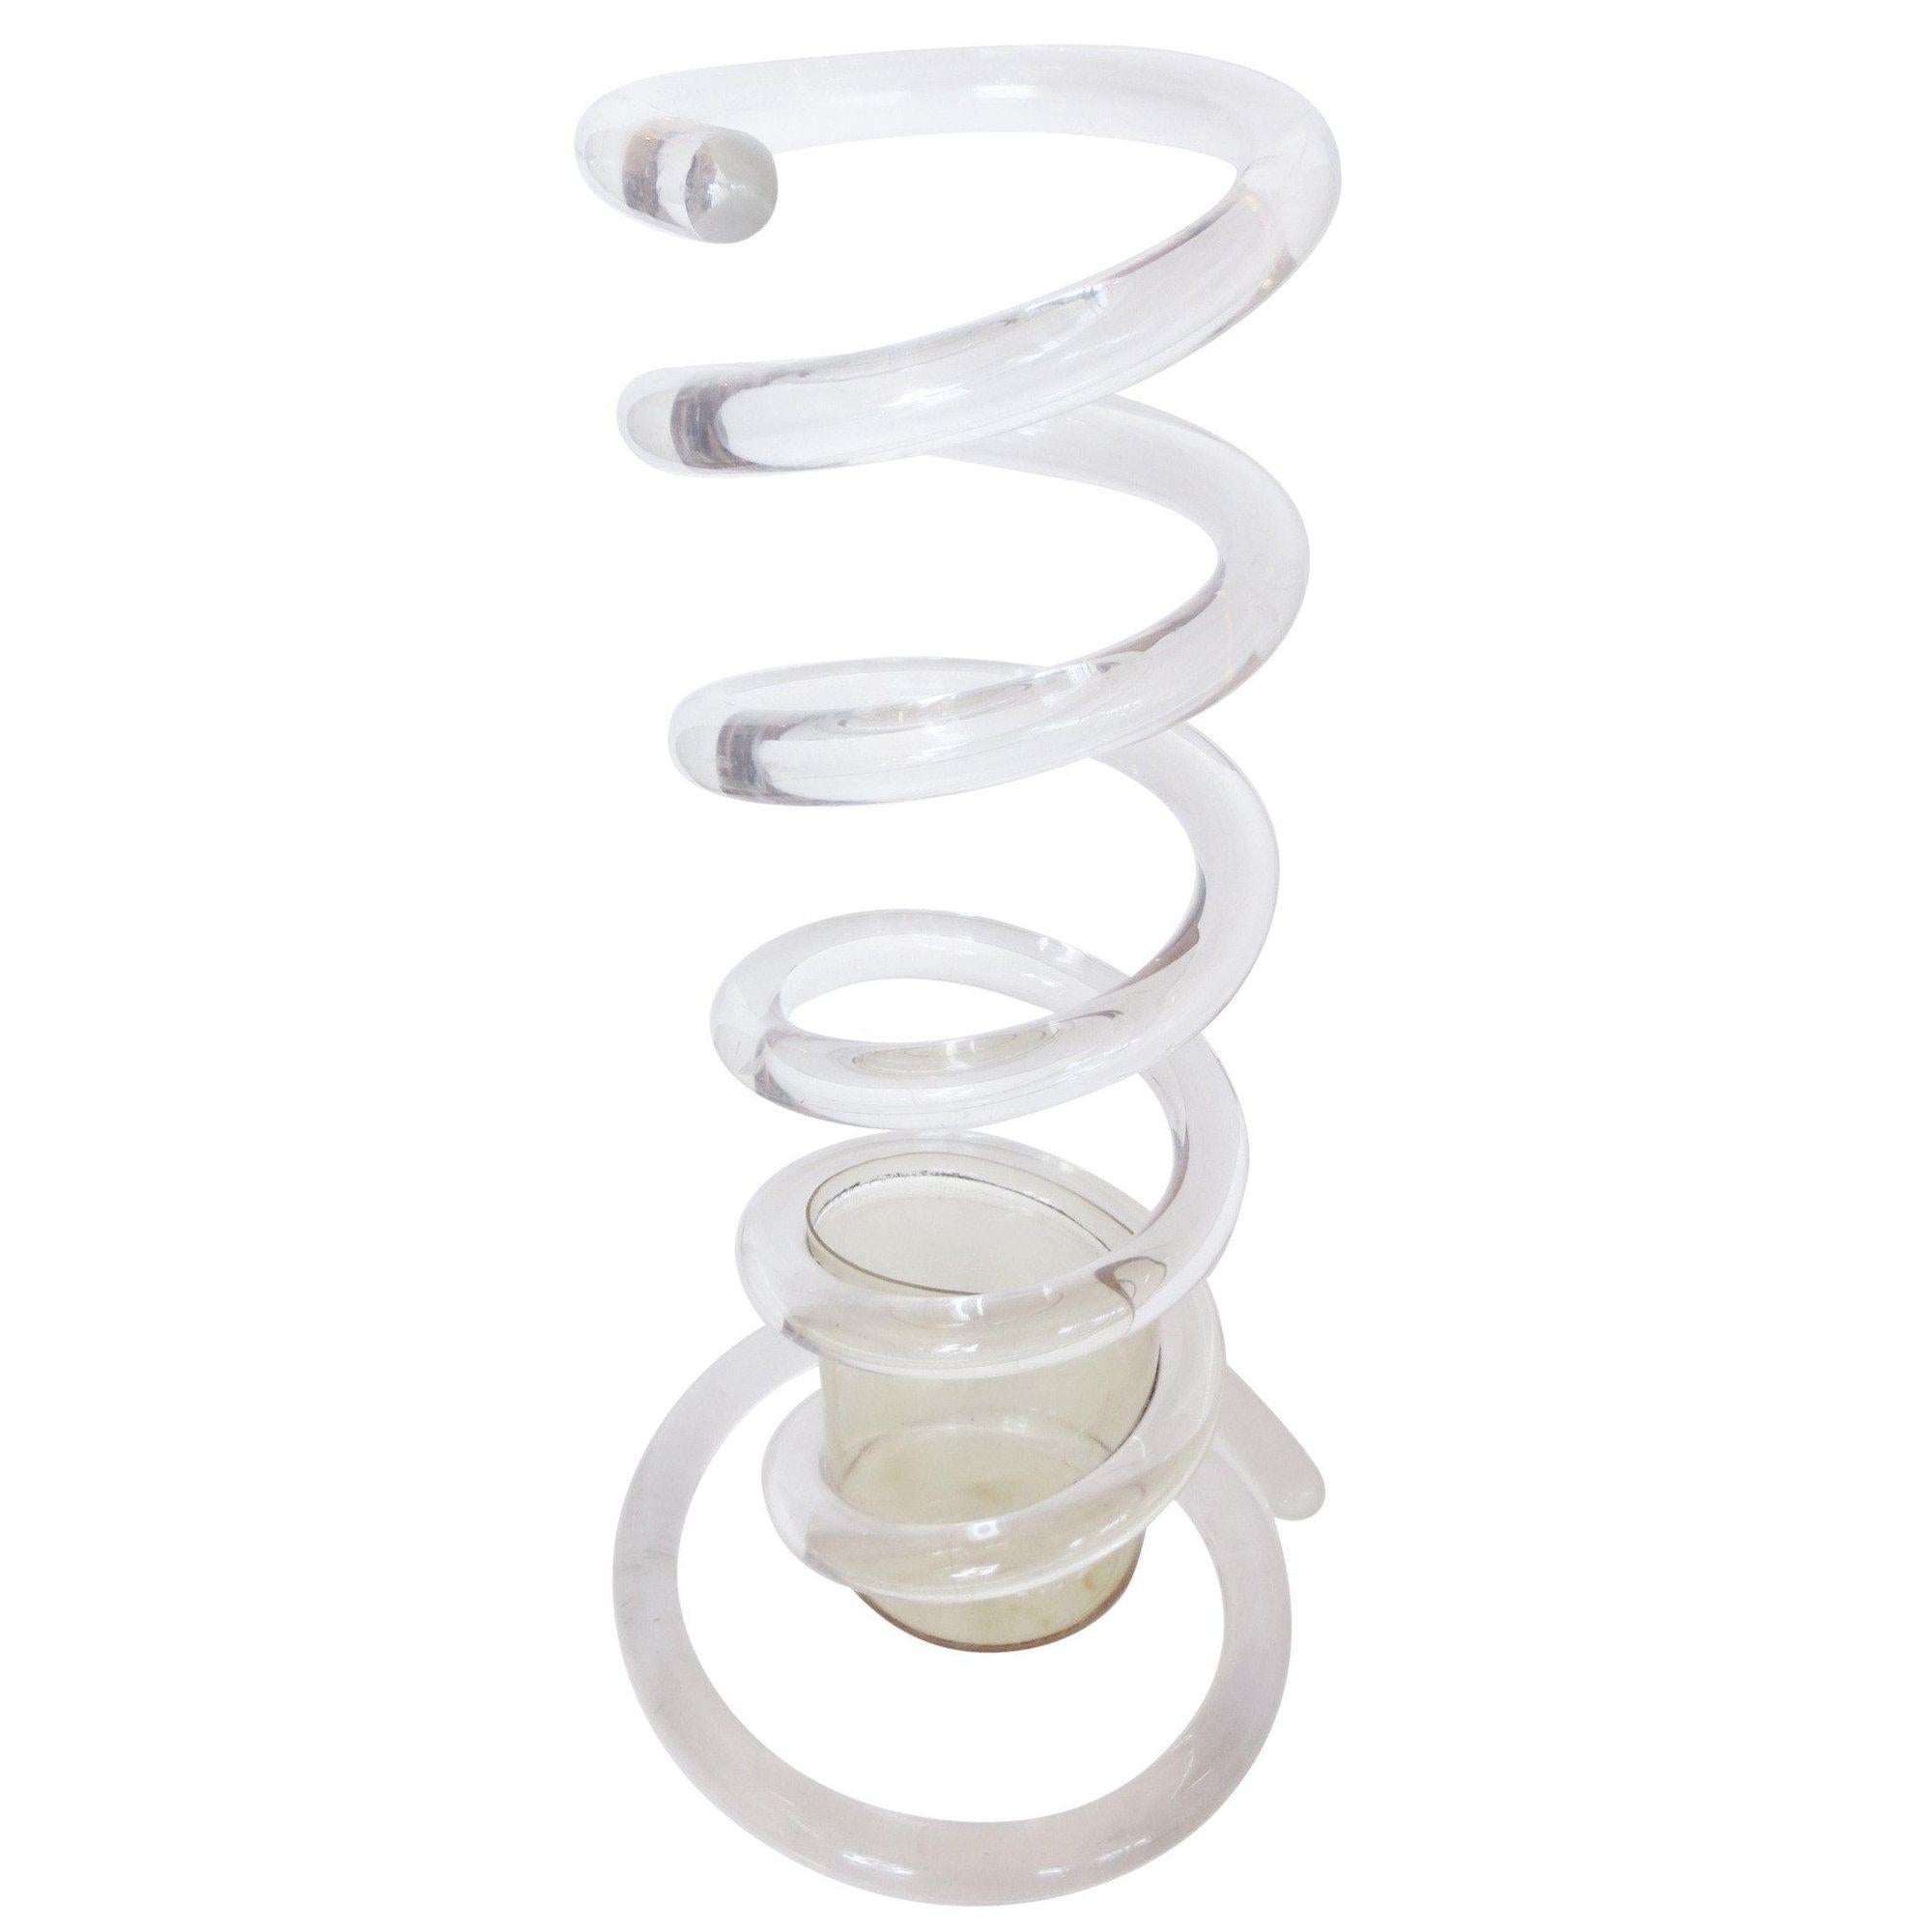 1950s Dorothy Thorpe Lucite Spiral Spring Umbrella Stand For Sale 2